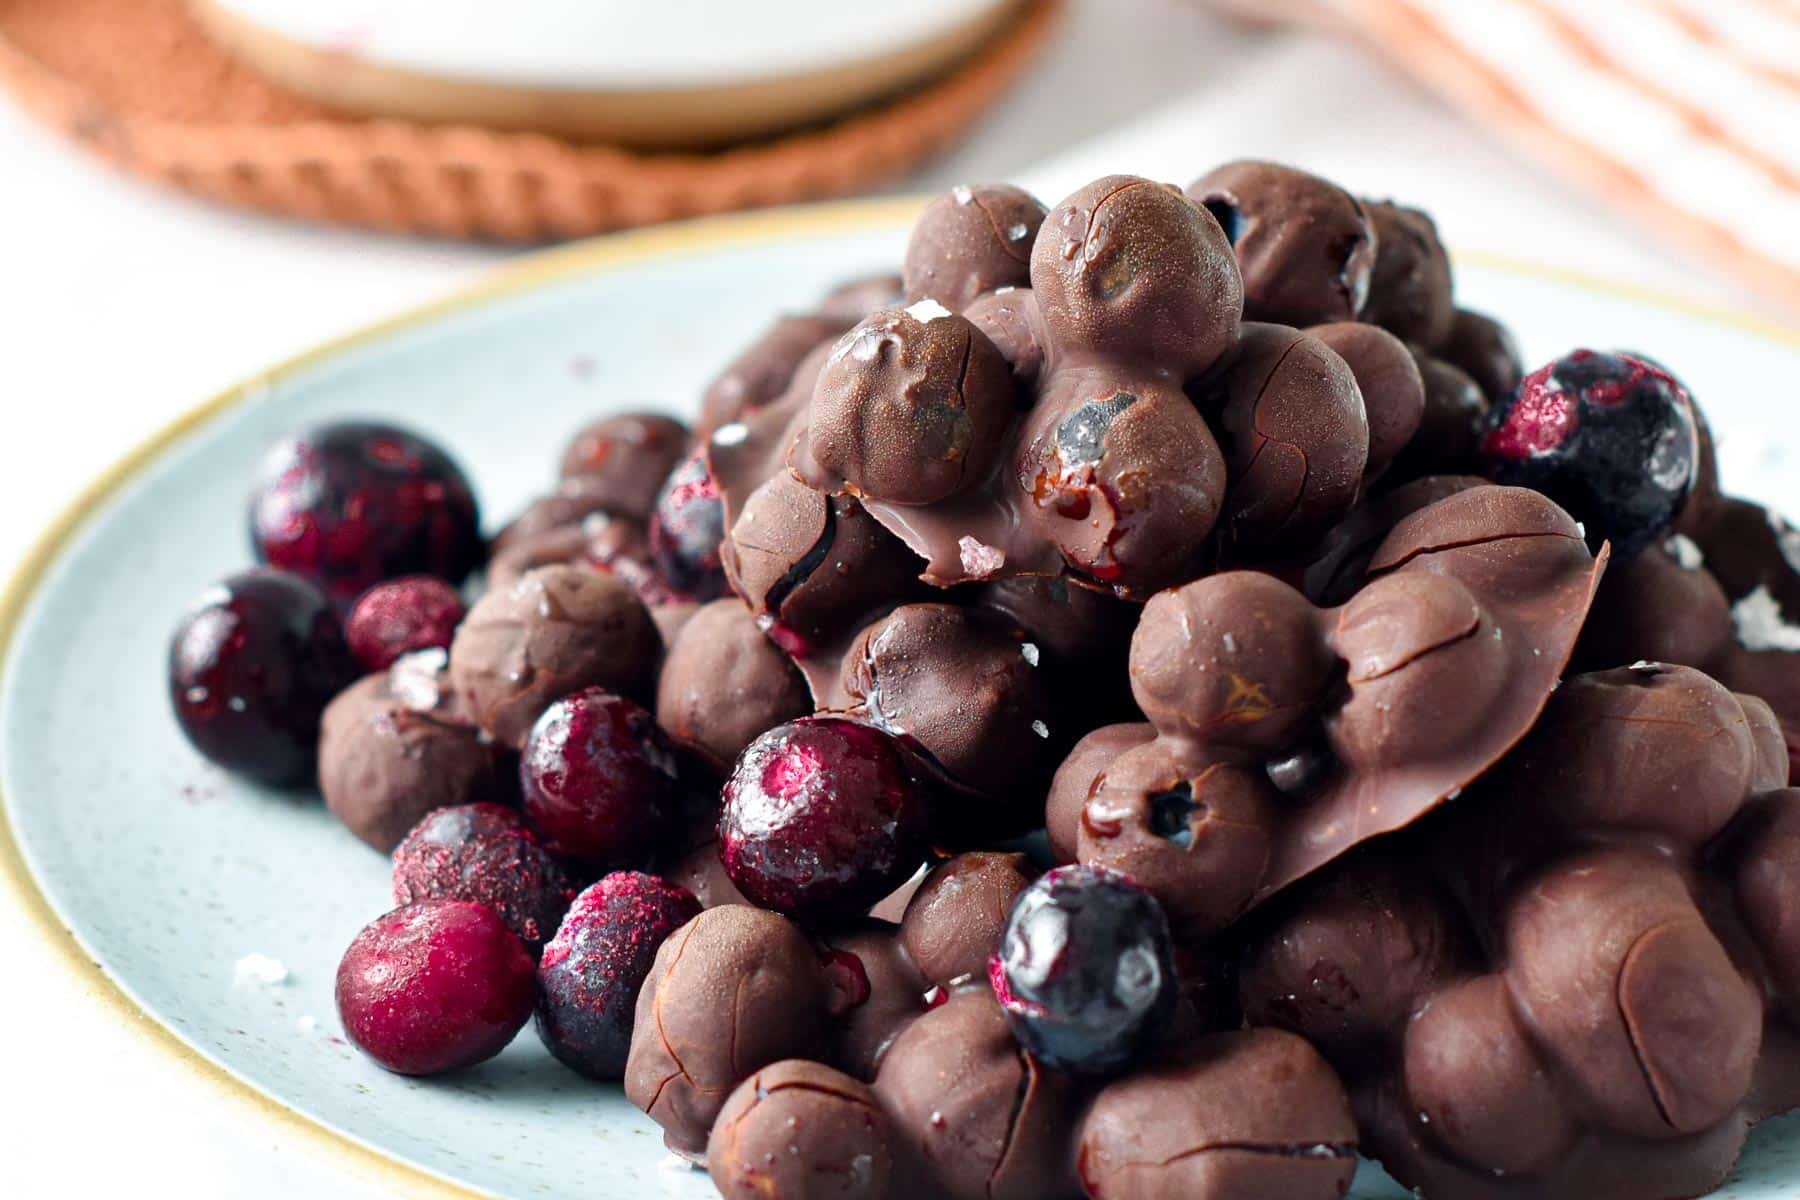 These Chocolate Covered Blueberries are the most easy snack ever made with just 3 ingredients and barely 20 minutes. Plus, this easy healthy snack is also keto-friendly, vegan and kids approved.